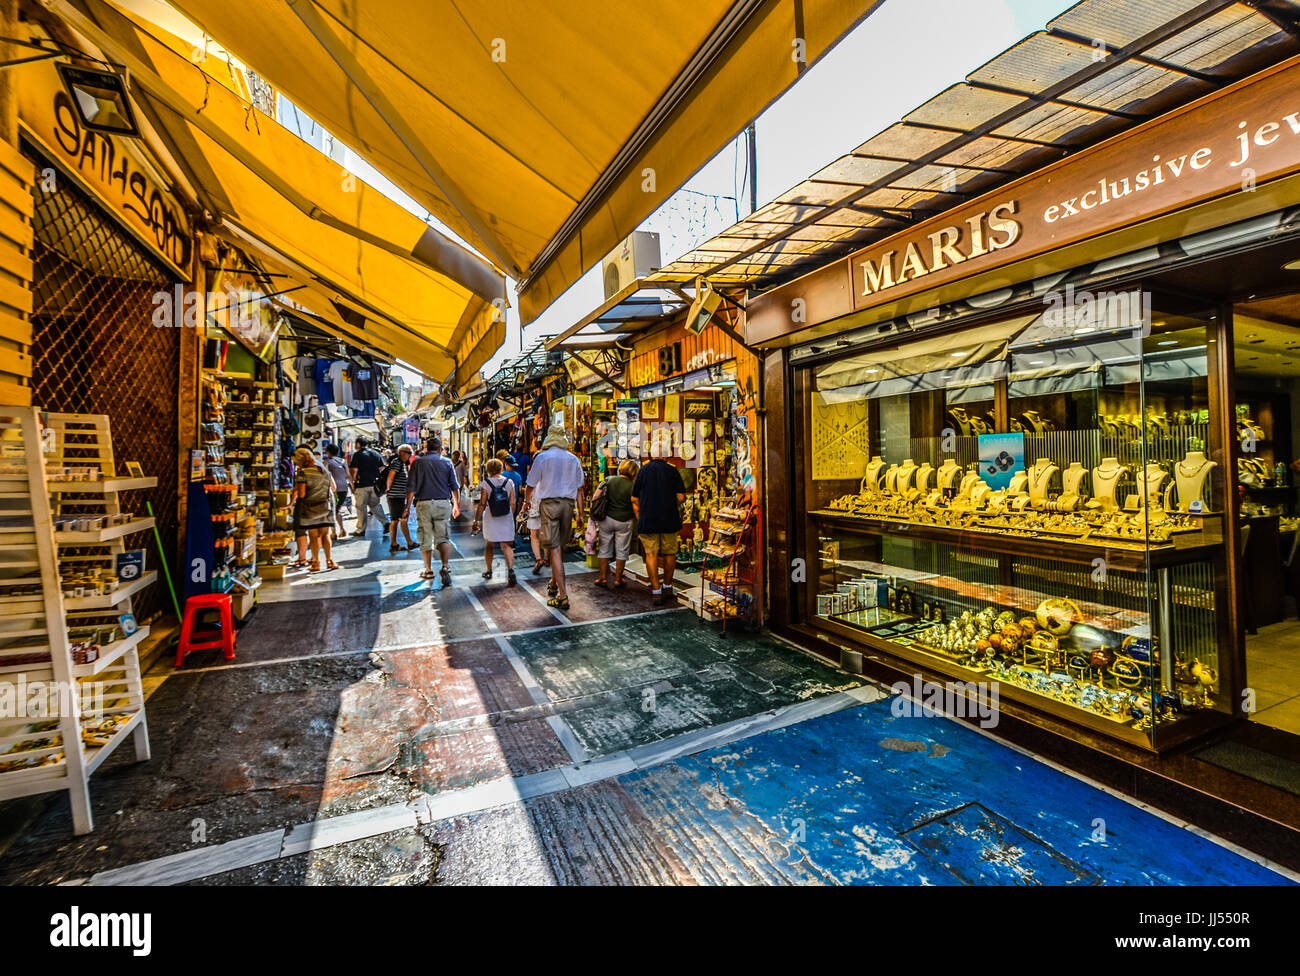 Tourists shopping and sightseeing in an outdoor market in the Plaka district of Athens Greece on a warm summer day Stock Photo